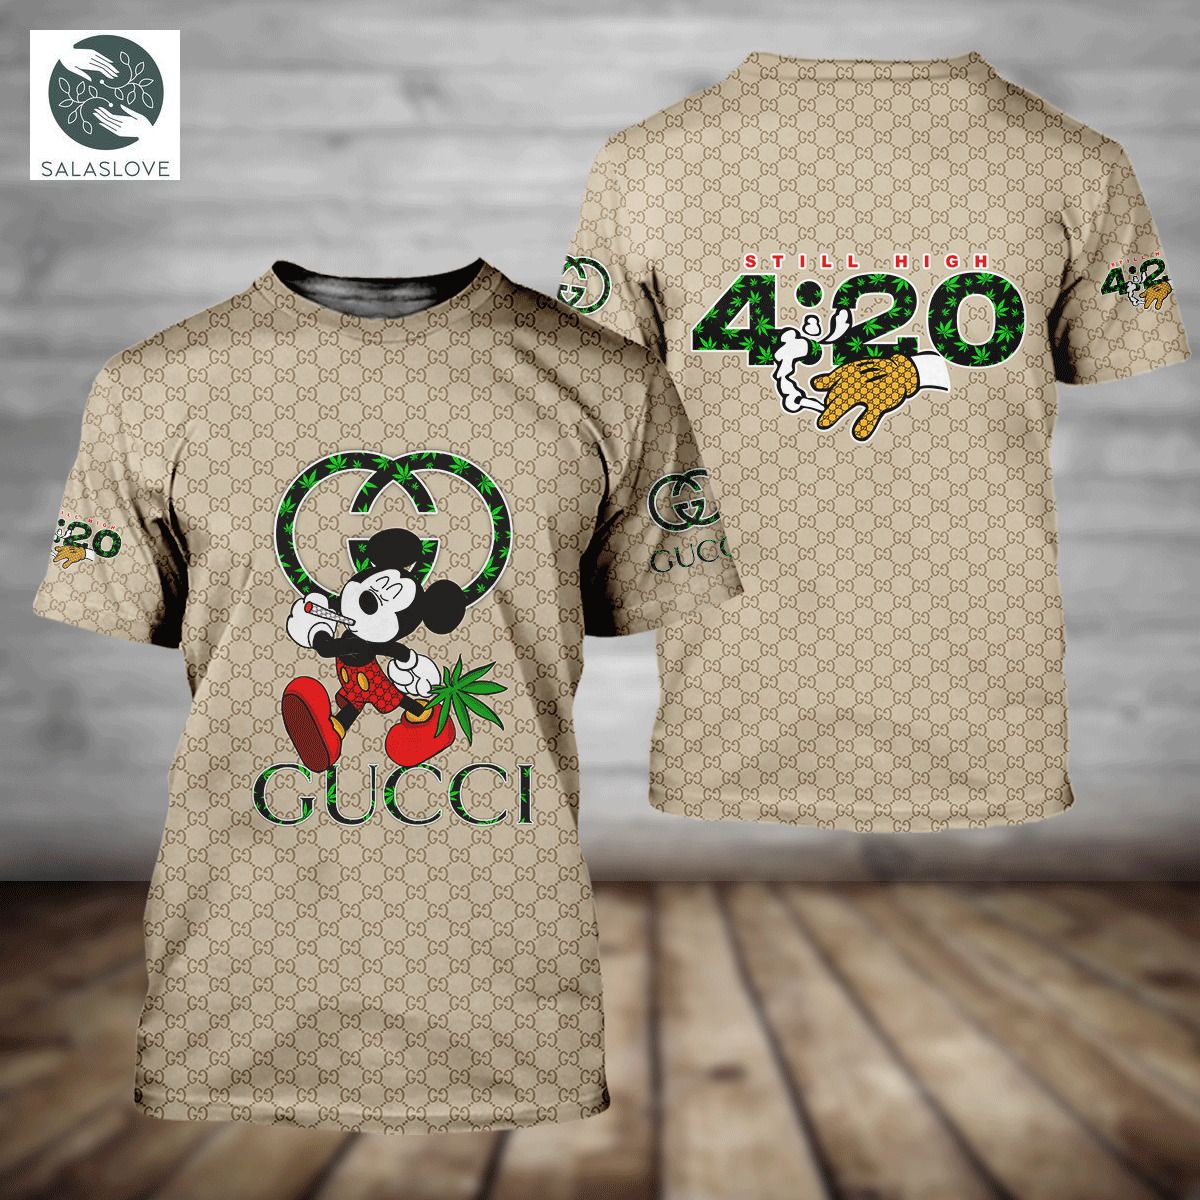 Gucci Mickey Mouse Still High Funny 3D T-shirt